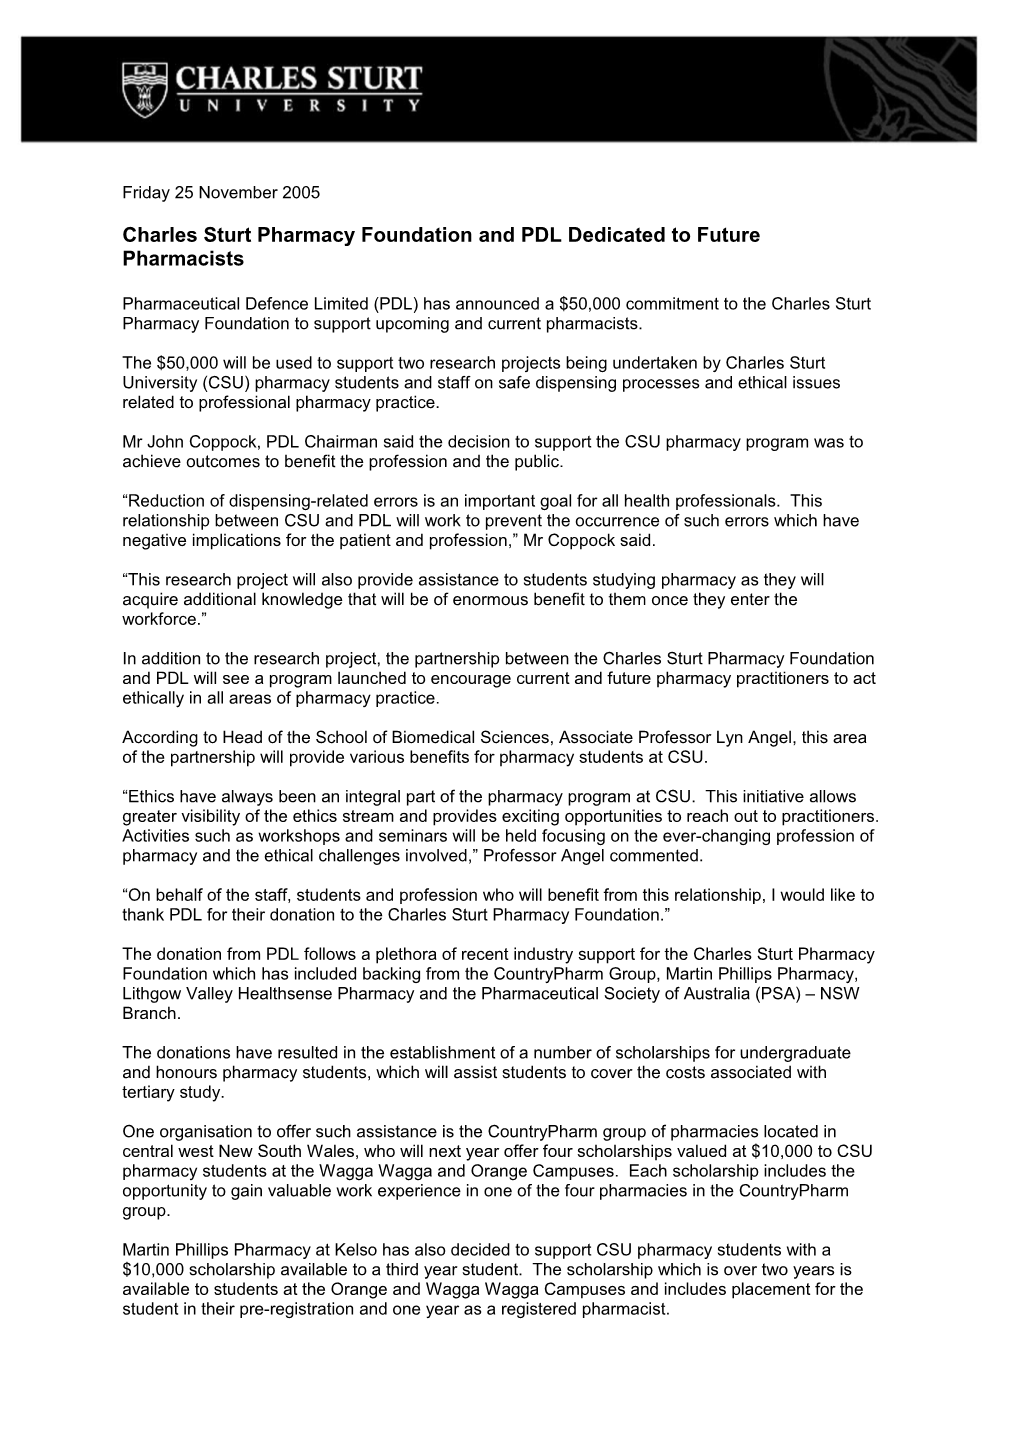 Charles Sturt Pharmacy Foundation and PDL Dedicated to Future Pharmacists